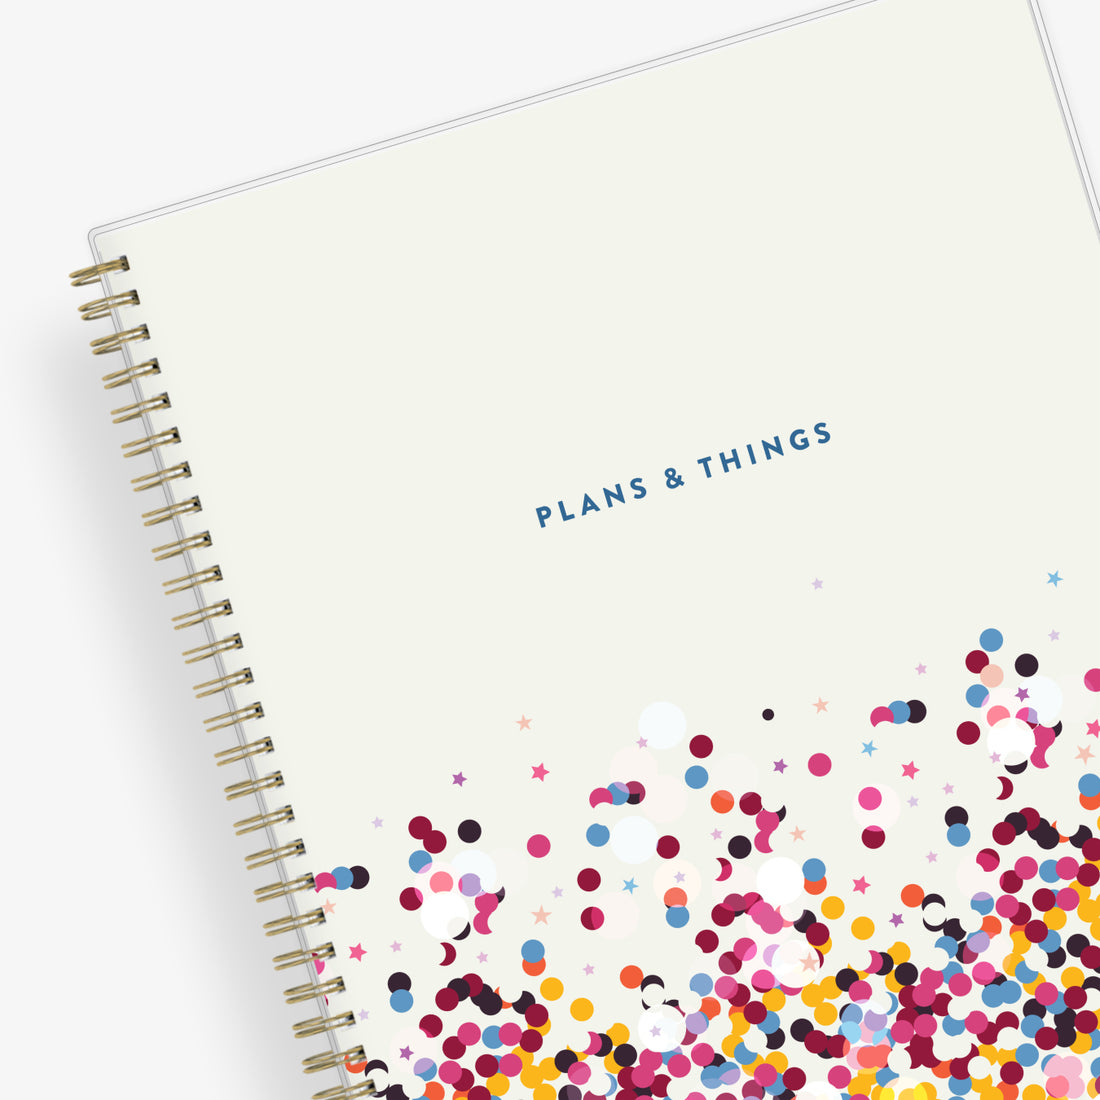 academic student planner featuring a confetti inspired front cover in 8.5x11 size, Titled &quot;Plans &amp; Things&quot;